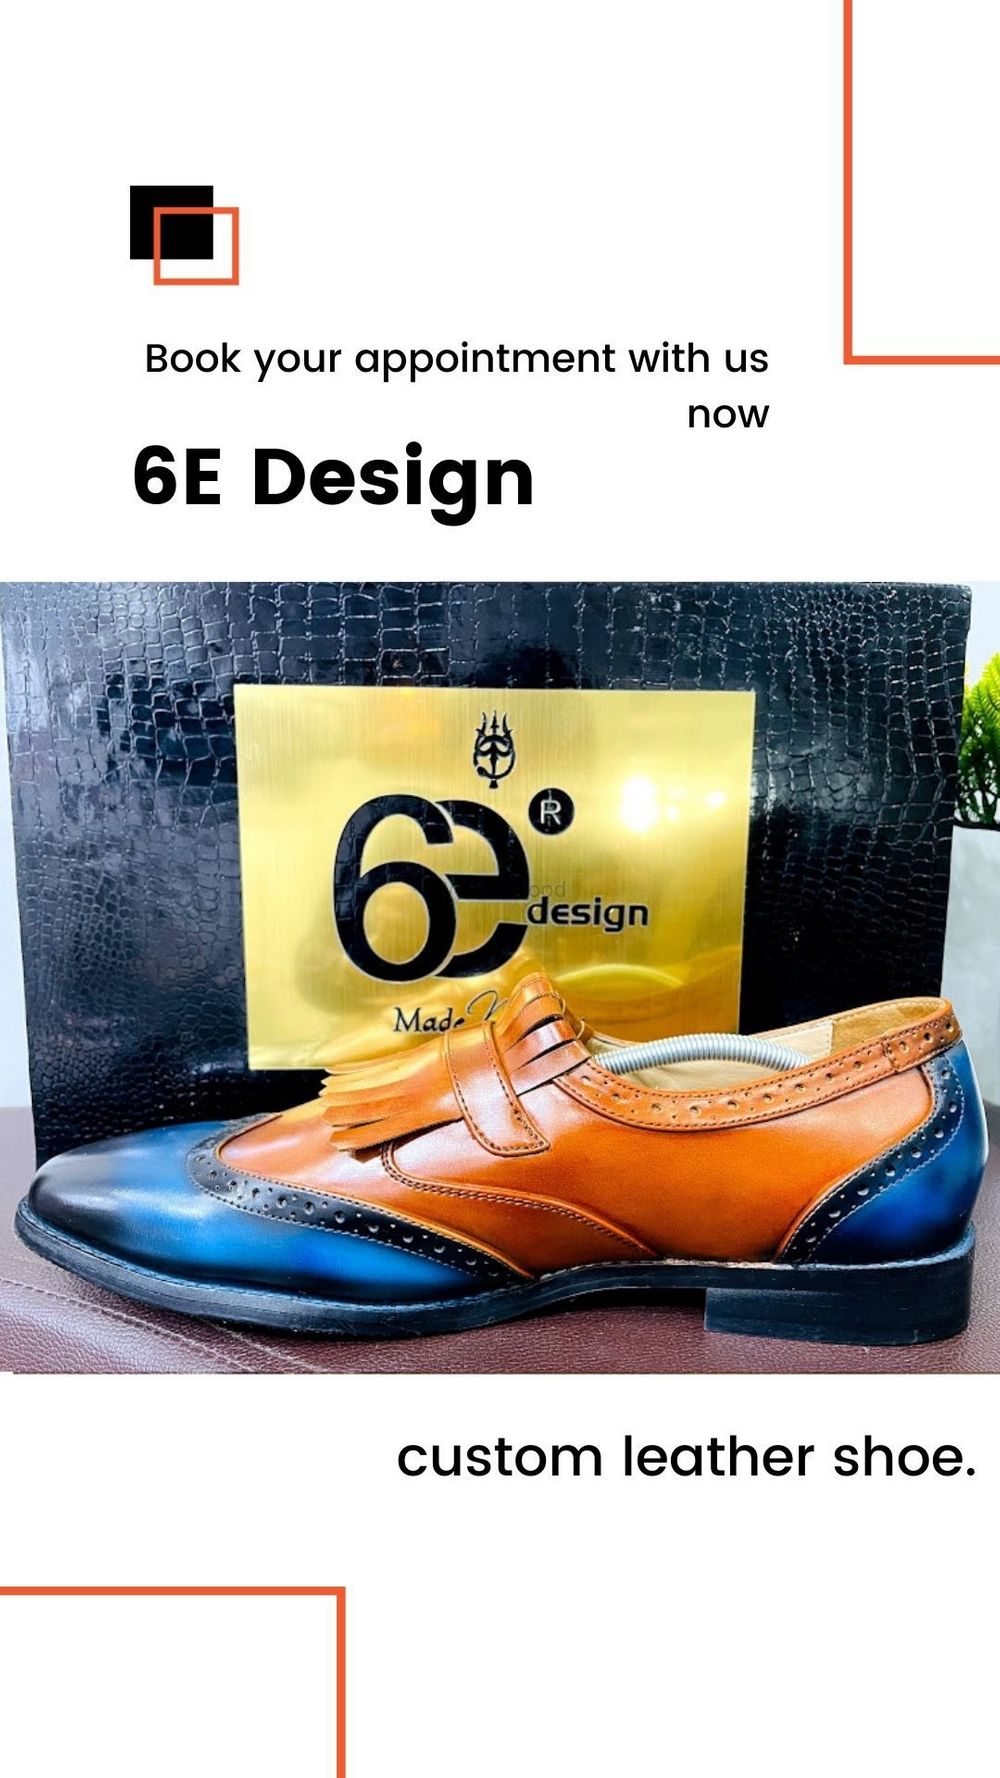 Photo From Shoe - By 6e Design